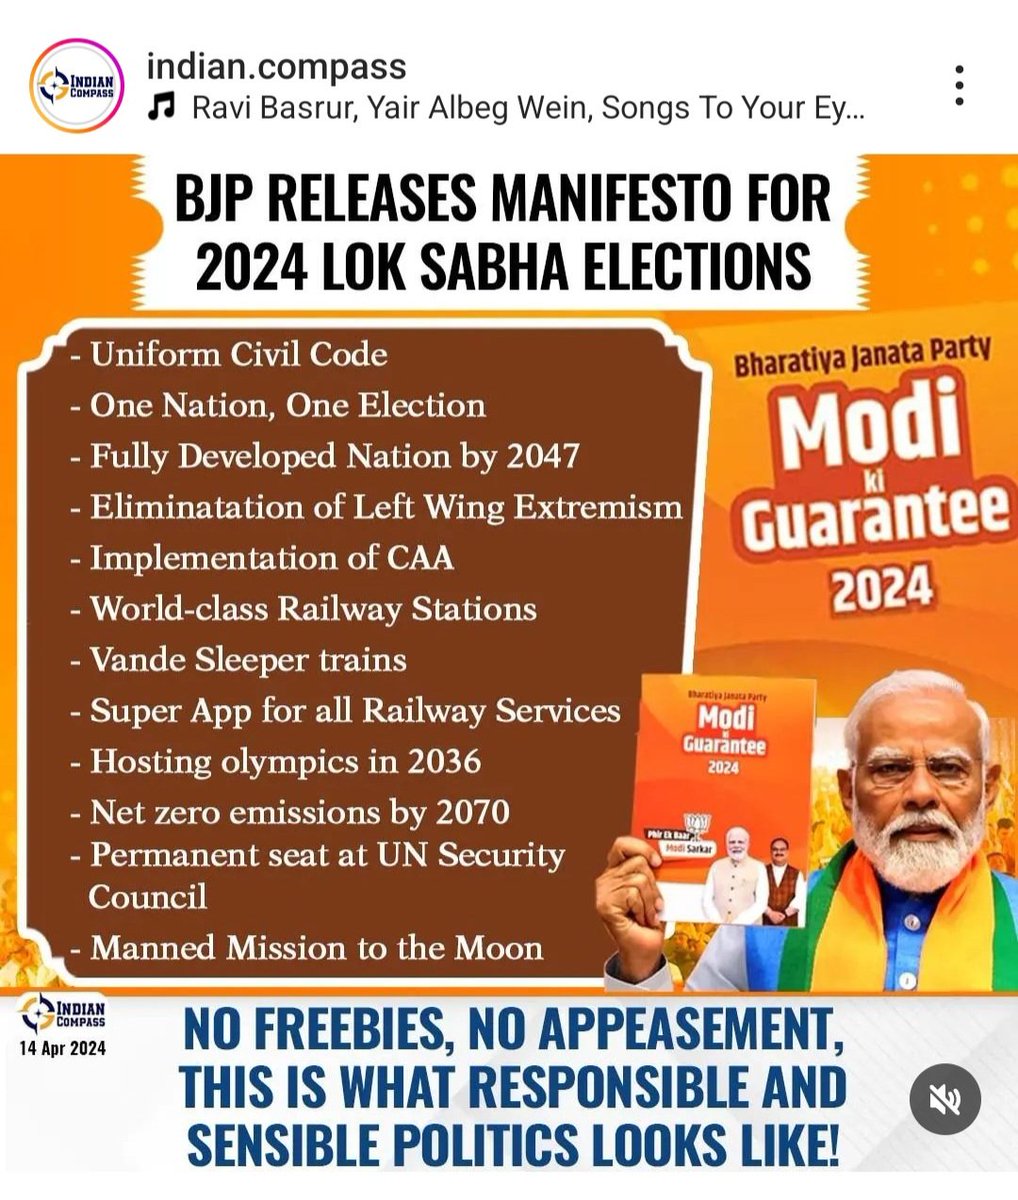 #BJPManifesto2024 - a lucid & robust plan for a thriving nation 🇮🇳